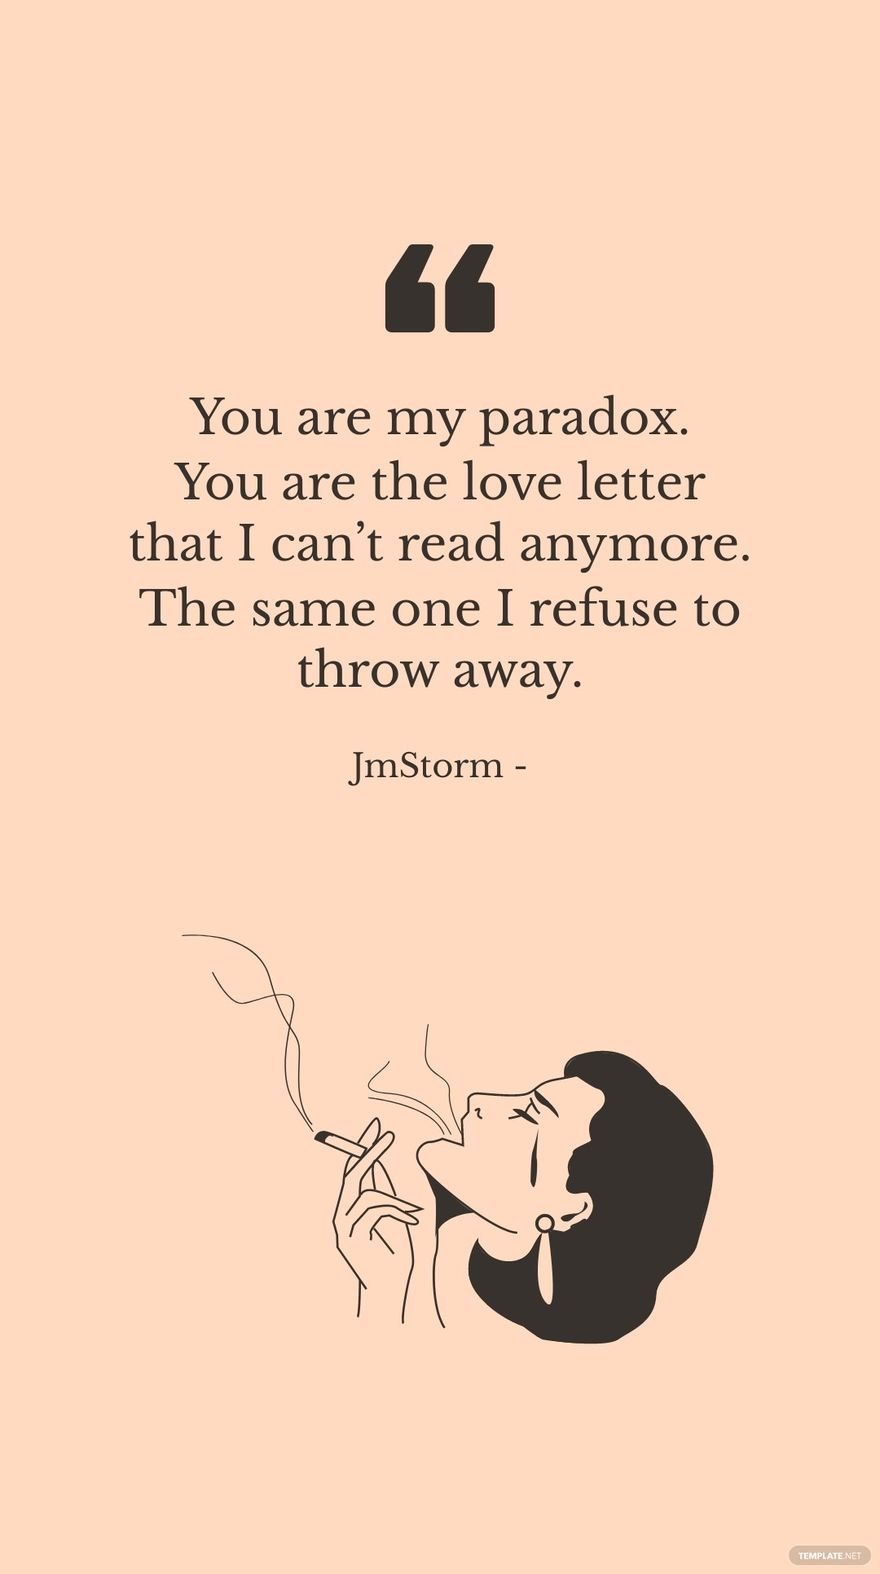 JmStorm - You are my paradox. You are the love letter that I can’t read anymore. The same one I refuse to throw away.